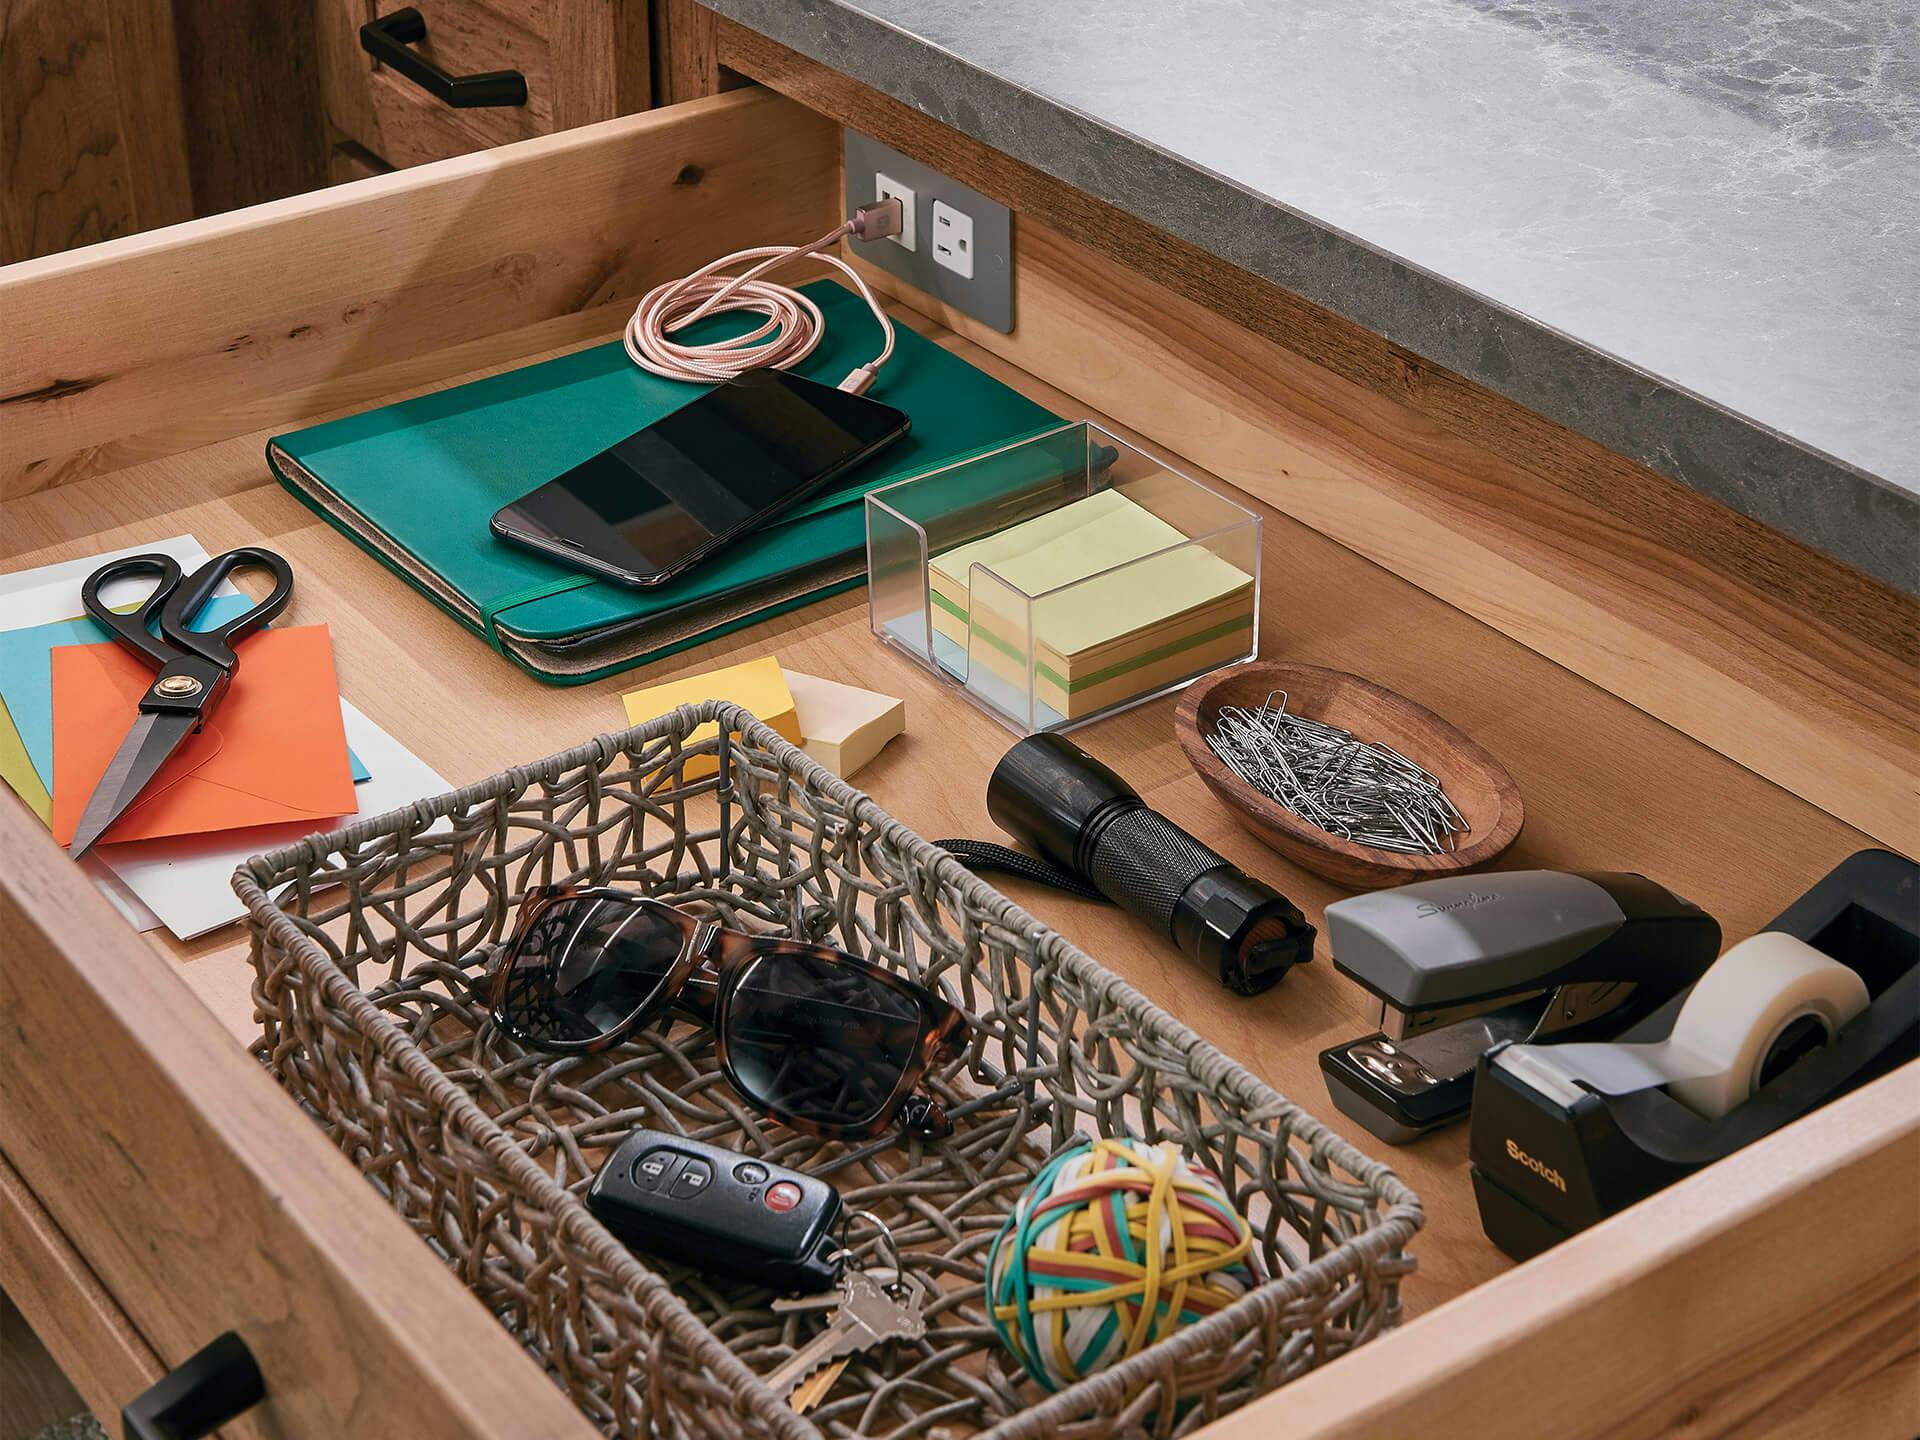 Open drawer containing a charging phone, keys, sunglasses and miscellaneous office supplies